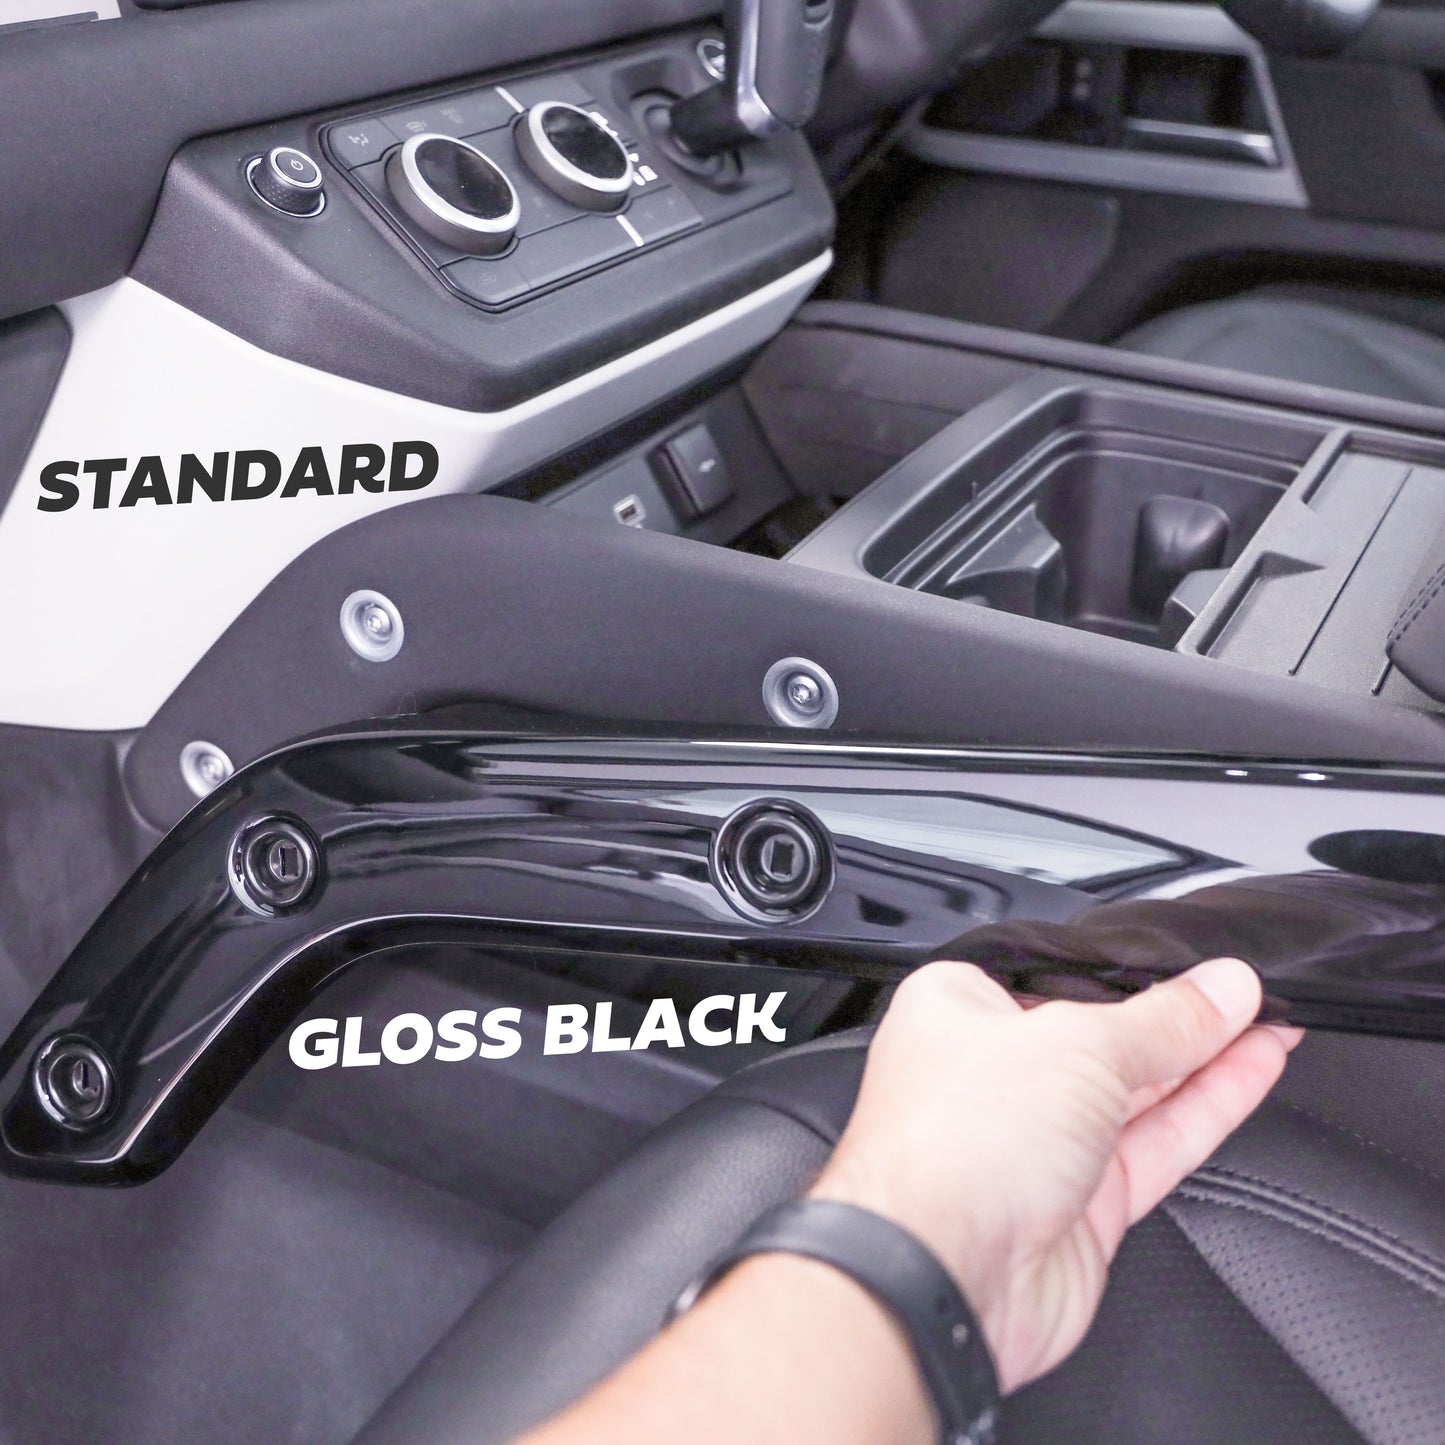 5pc Gloss Black Interior Trim Kit (Centre console & door pulls) for Land Rover Defender - 110/130 - LHD